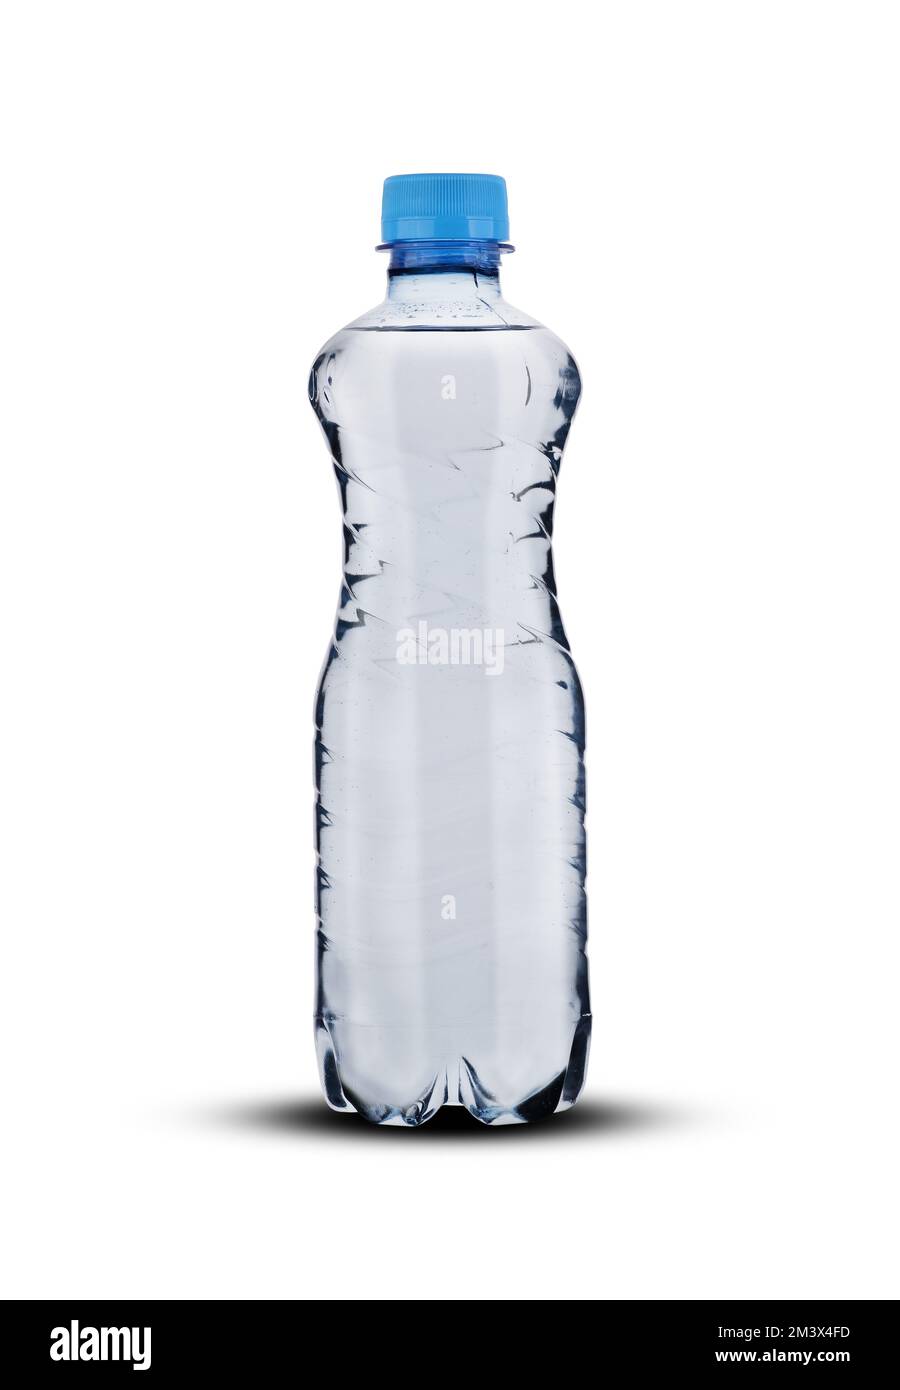 https://c8.alamy.com/comp/2M3X4FD/small-plastic-bottle-with-mineral-water-on-a-white-background-2M3X4FD.jpg